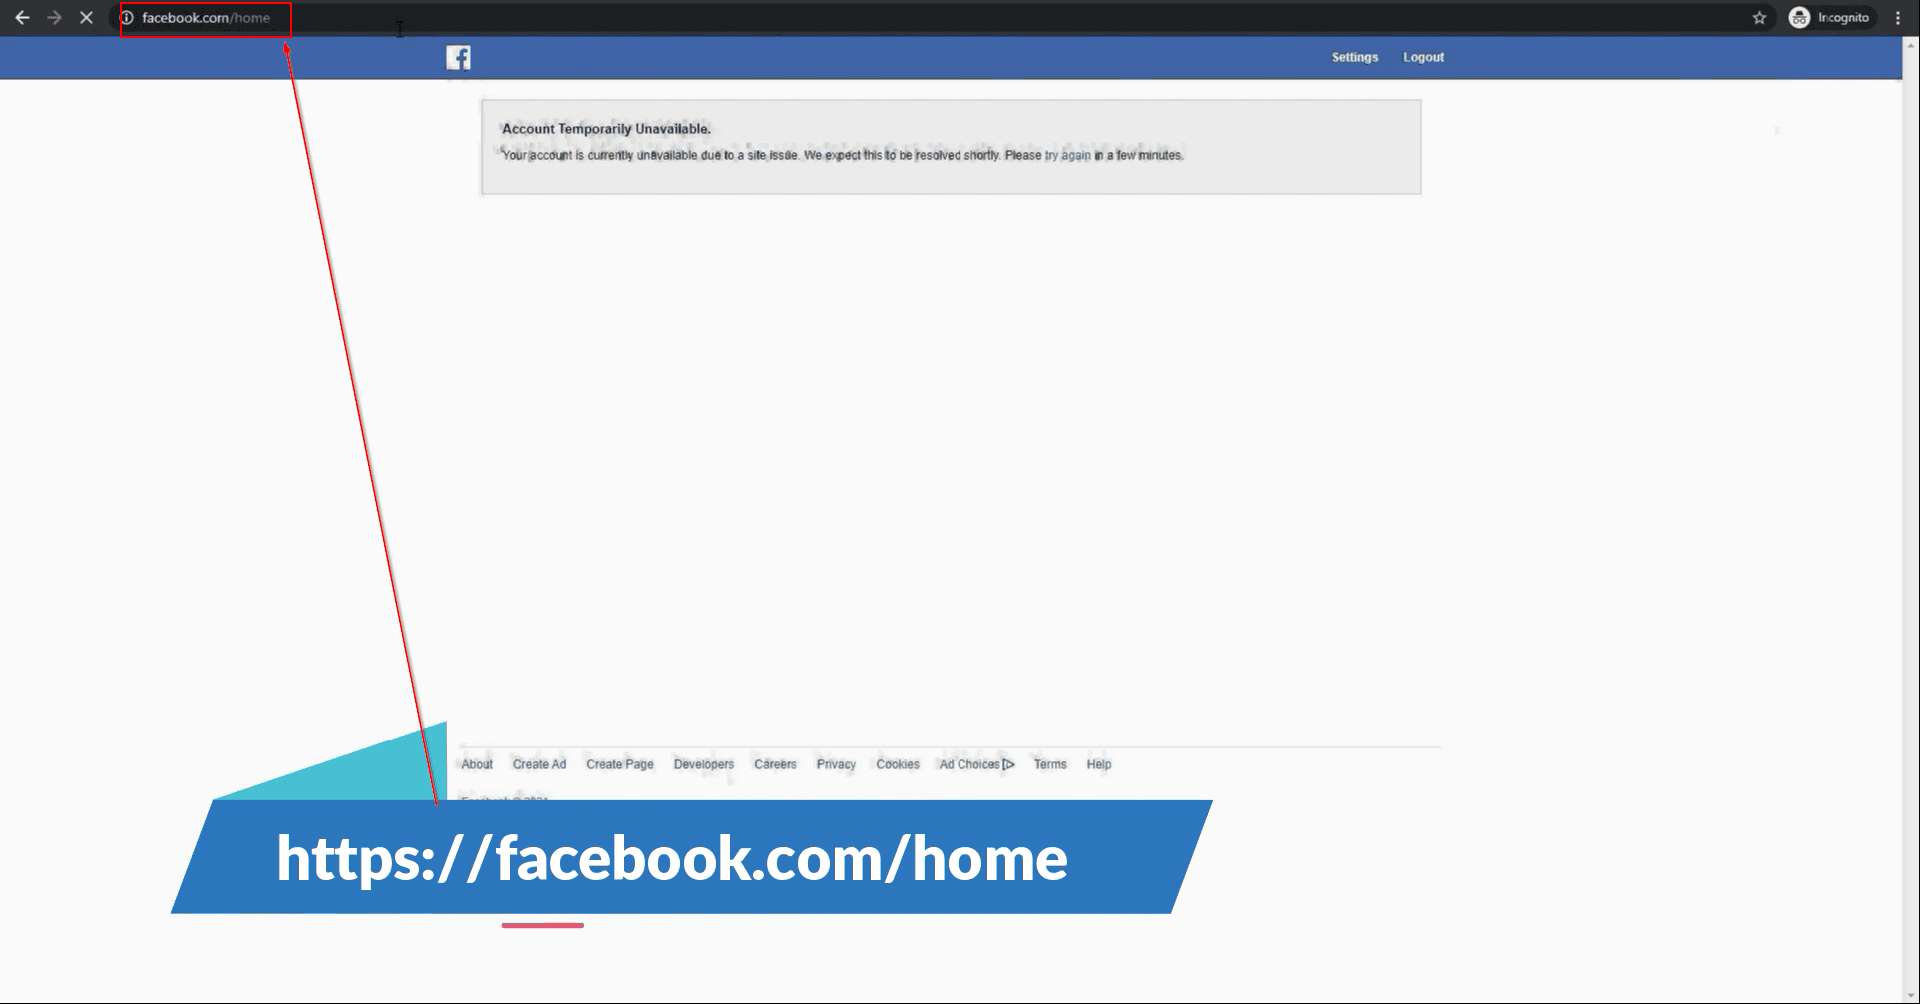 How To Fix a Facebook Account Temporarily Unavailable Error